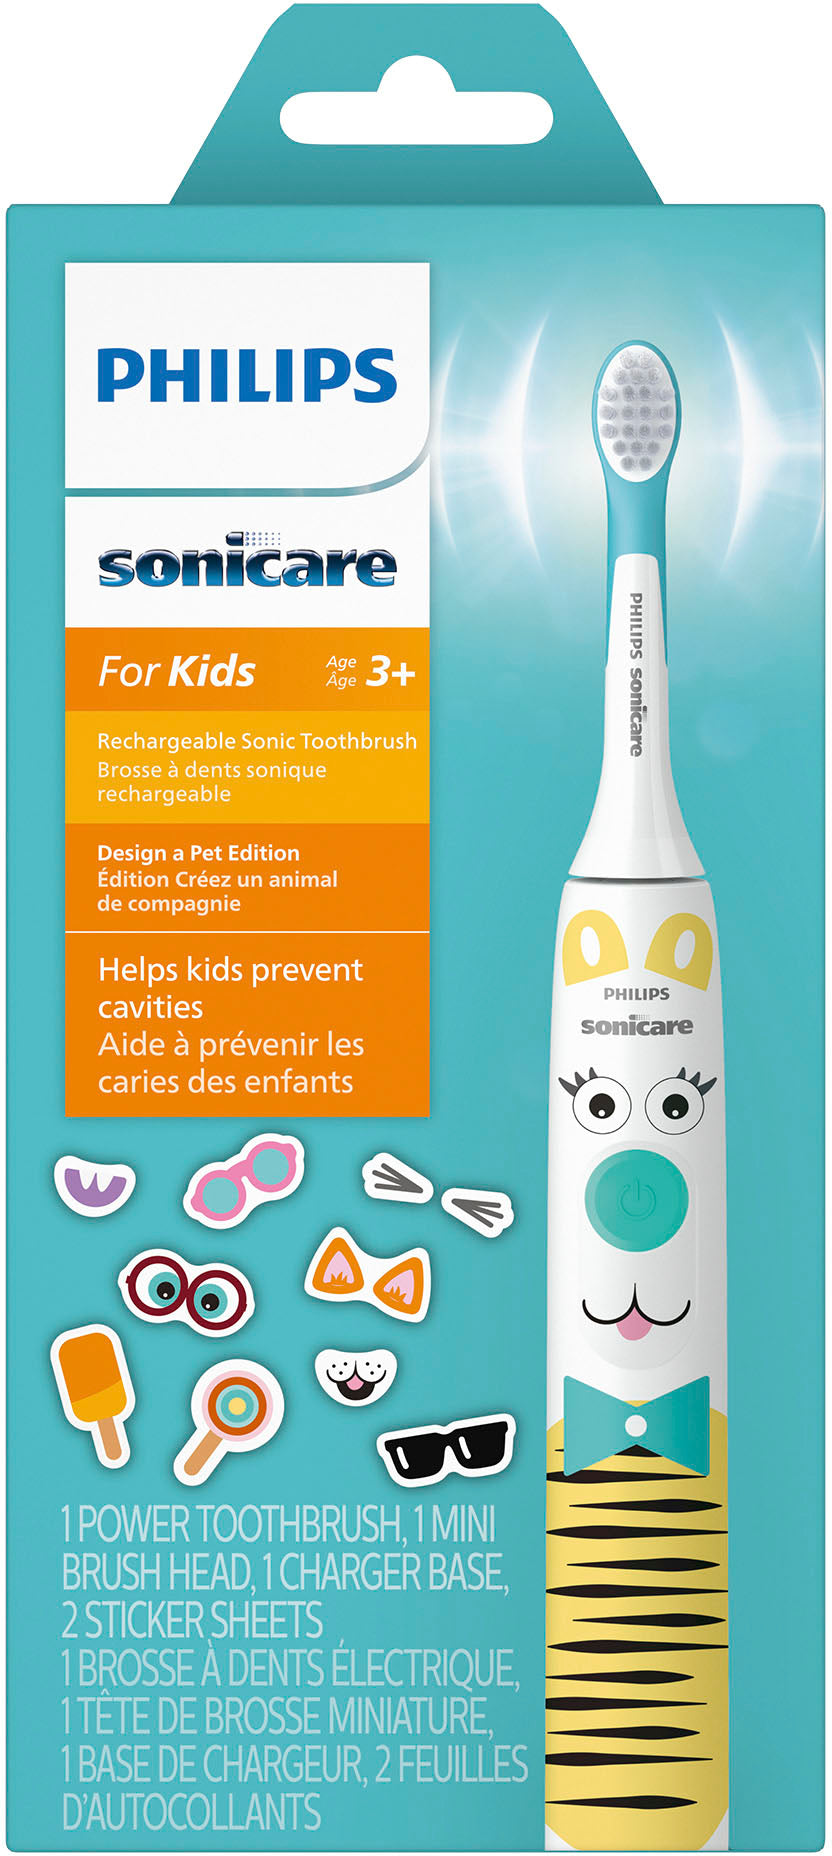 Philips Sonicare - Sonicare for Kids Design a Pet Edition Electric Toothbrush - White With Aqua Blue Button_6